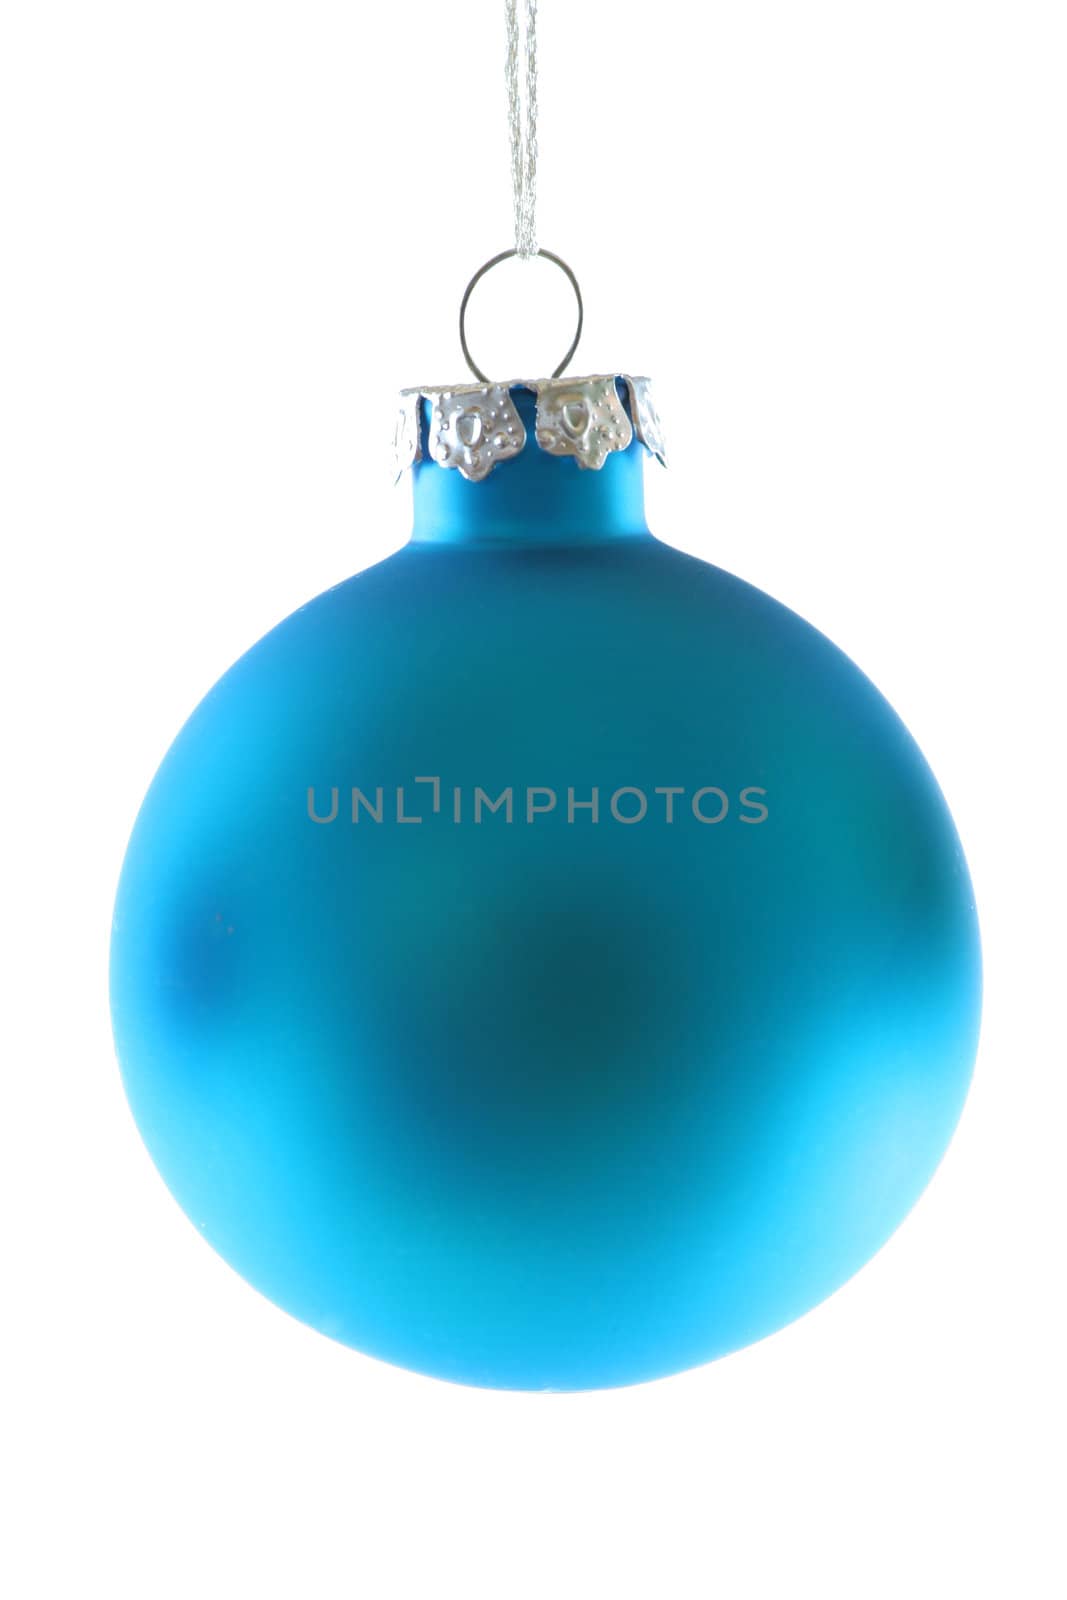 Sky Blue  ornament isolated on white background. by jarenwicklund